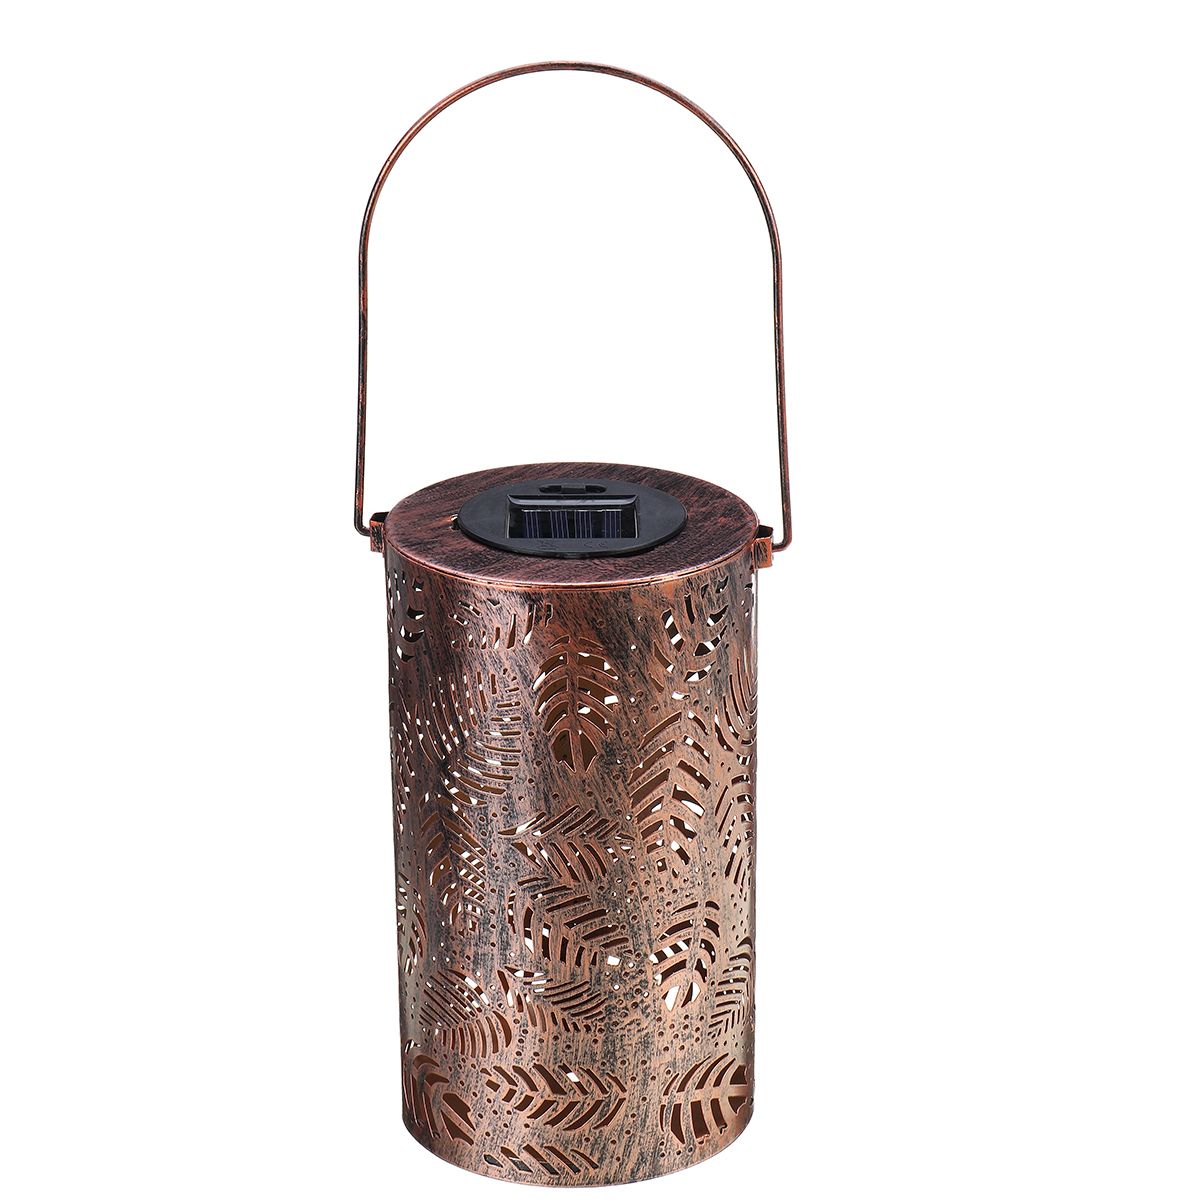 Hanging-LED-Solar-Light-Wrought-Iron-Hollow-Leaf-Lantern-Garden-Lawn-Yard-Table-Decorative-Outdoor-L-1730334